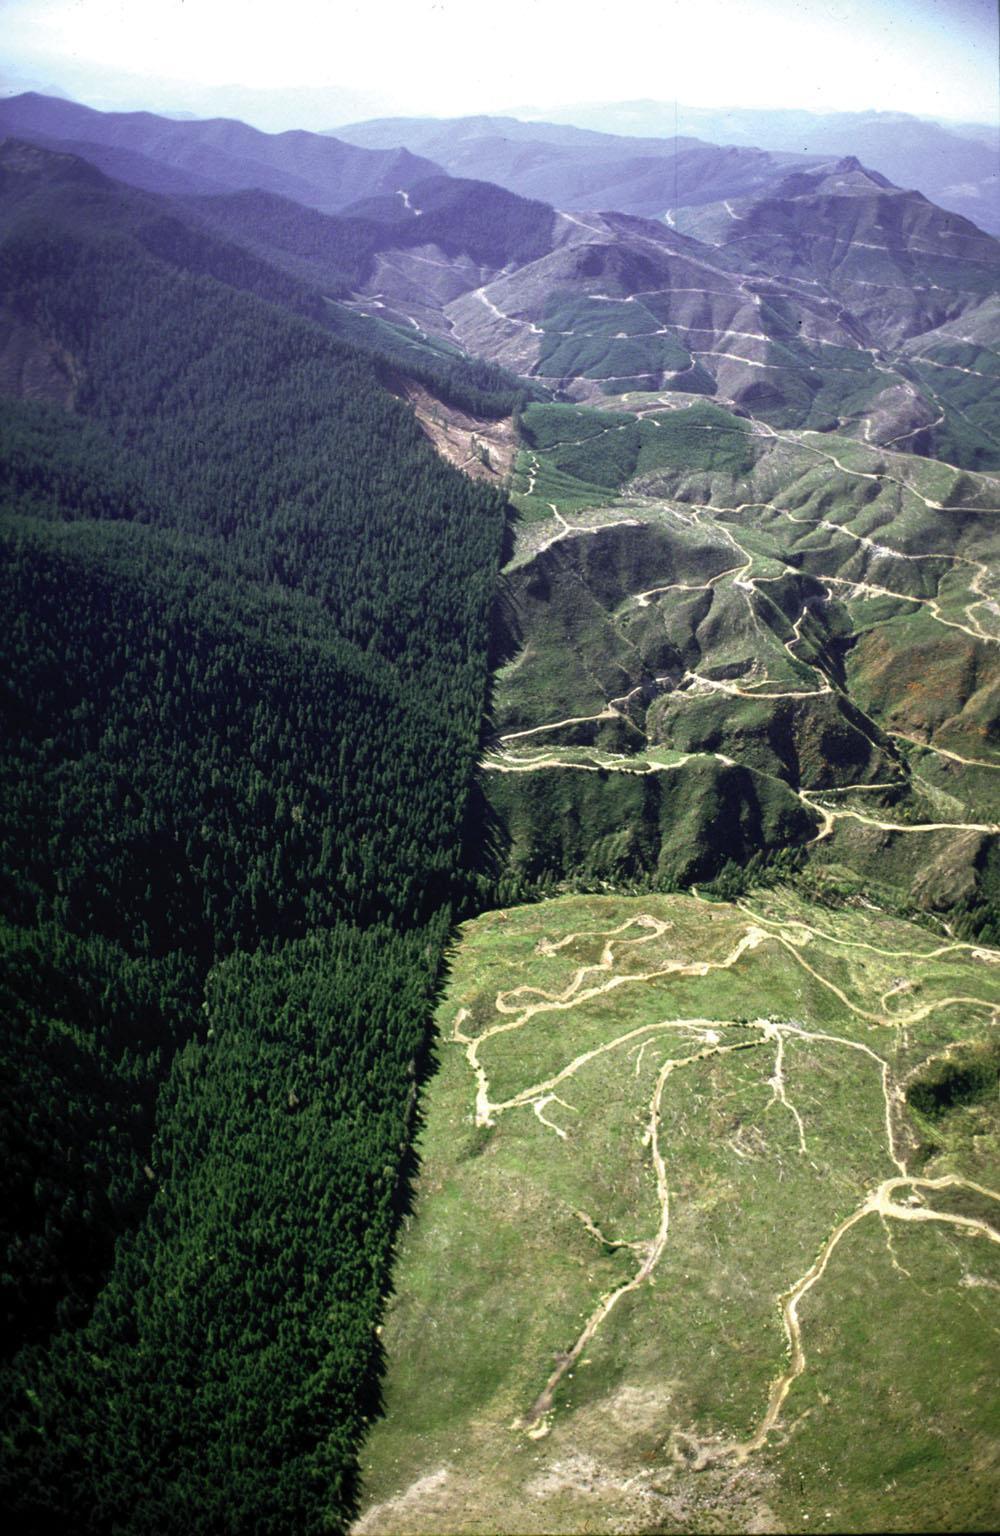 Aerial view showing